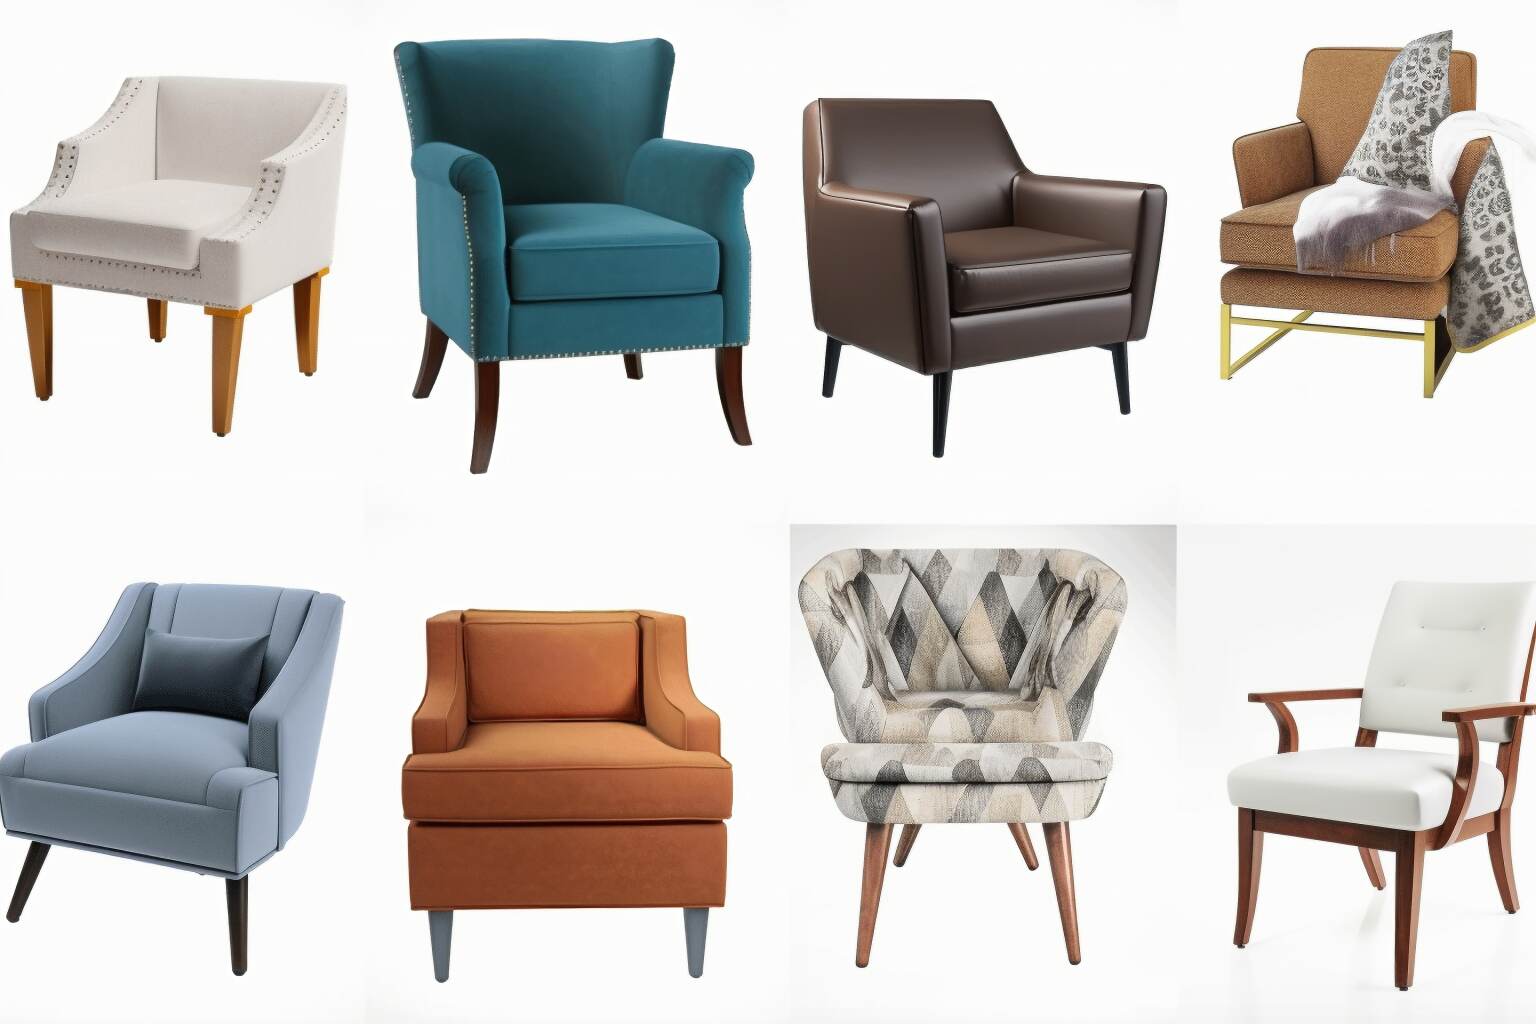 A Collage Showcasing Images Of The Different Types Of Living Room Armchairs